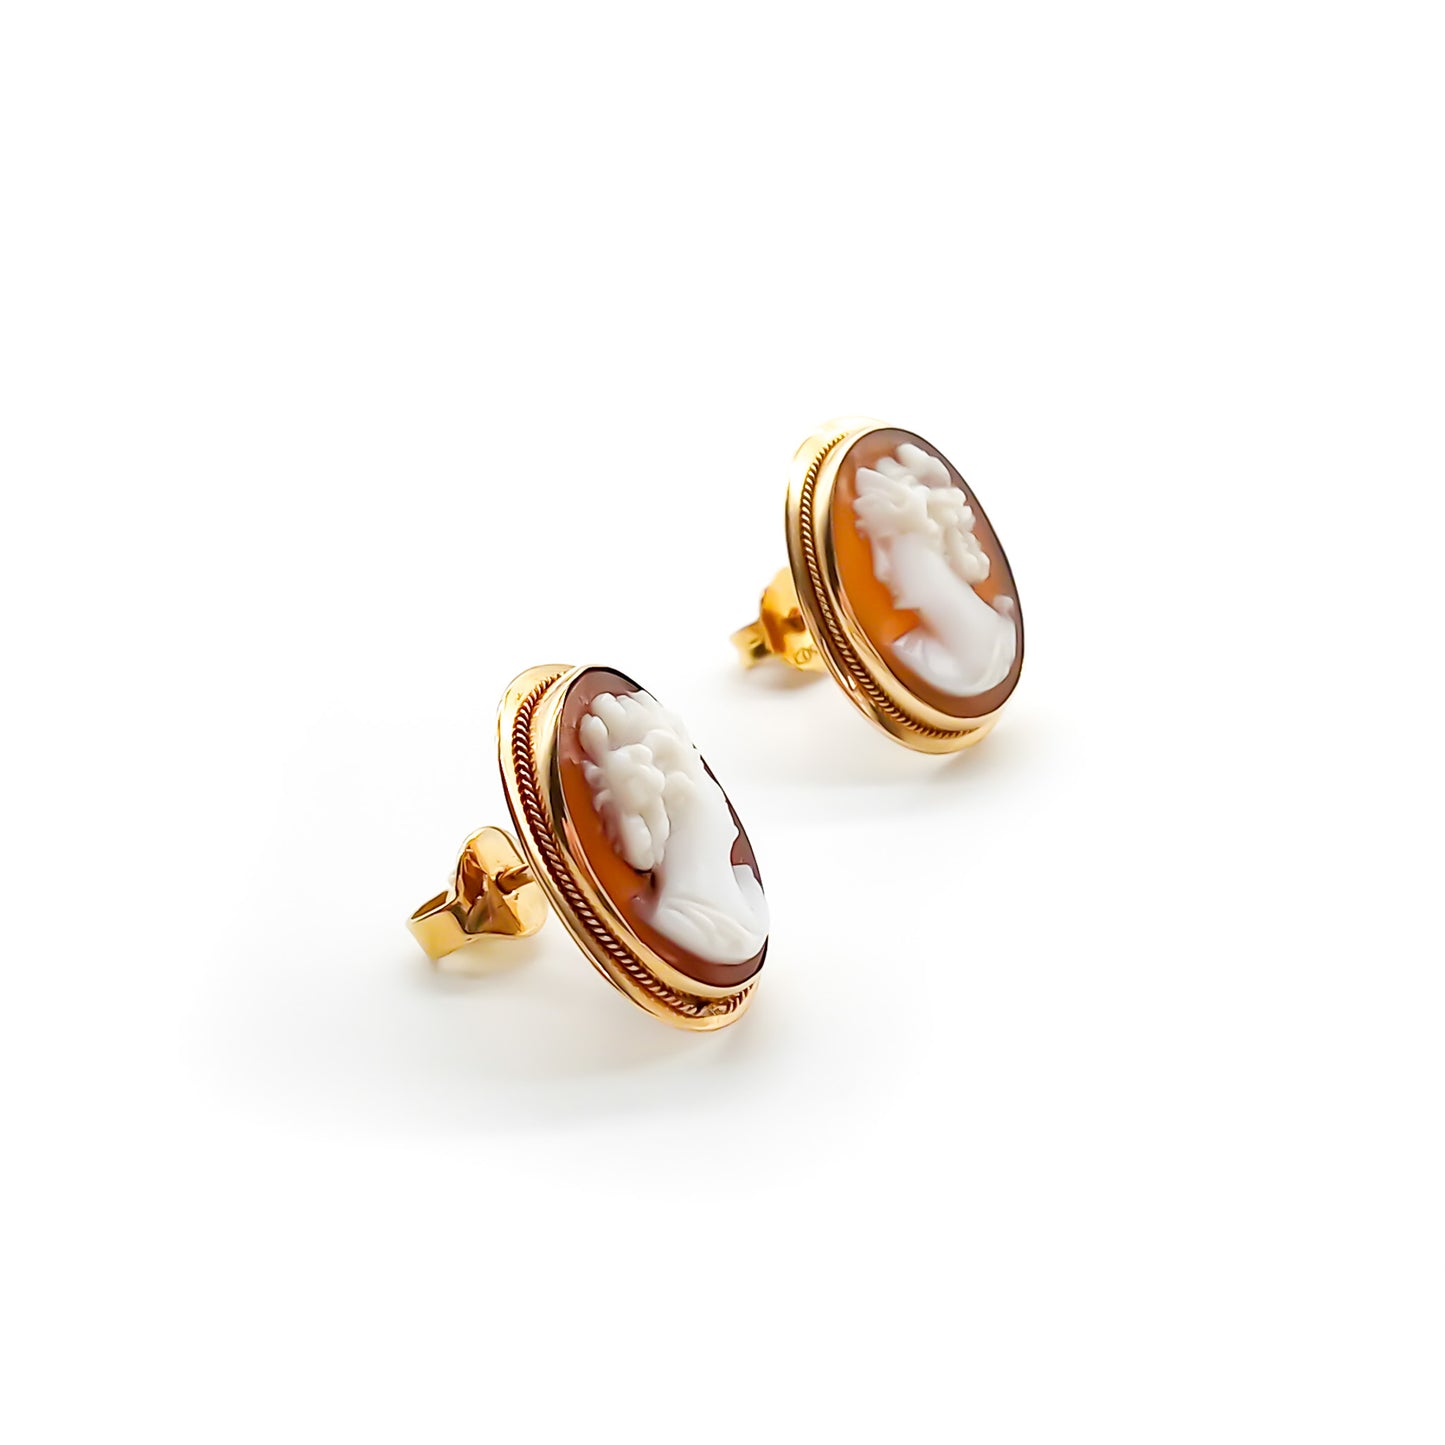 Classic 18ct rose gold stud earrings set with beautifully carved cameos.